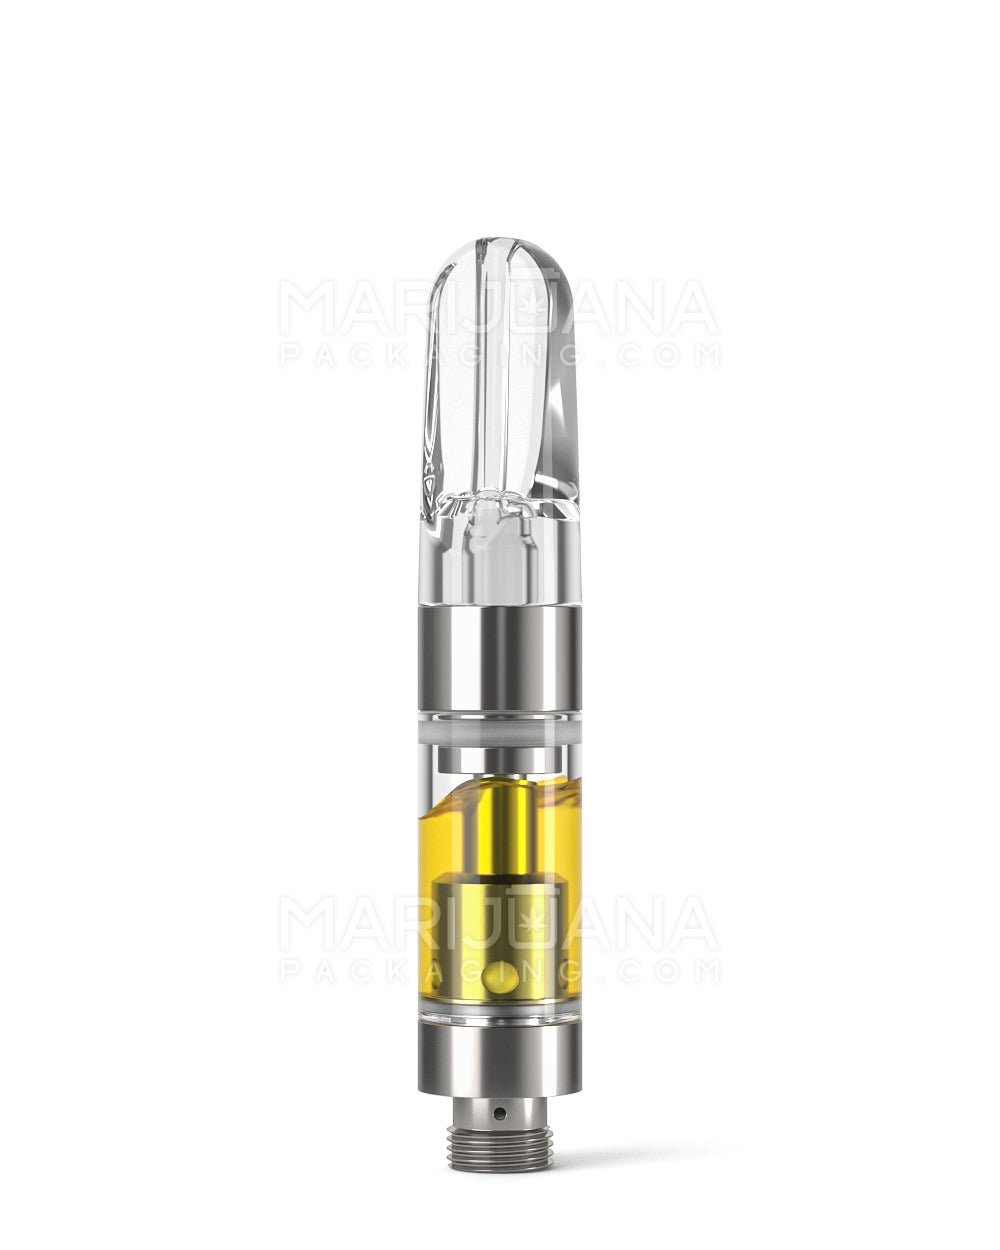 Ceramic Core Glass Vape Cartridge with Flat Clear Plastic Mouthpiece | 0.5mL - Press On - 1600 Count - 2